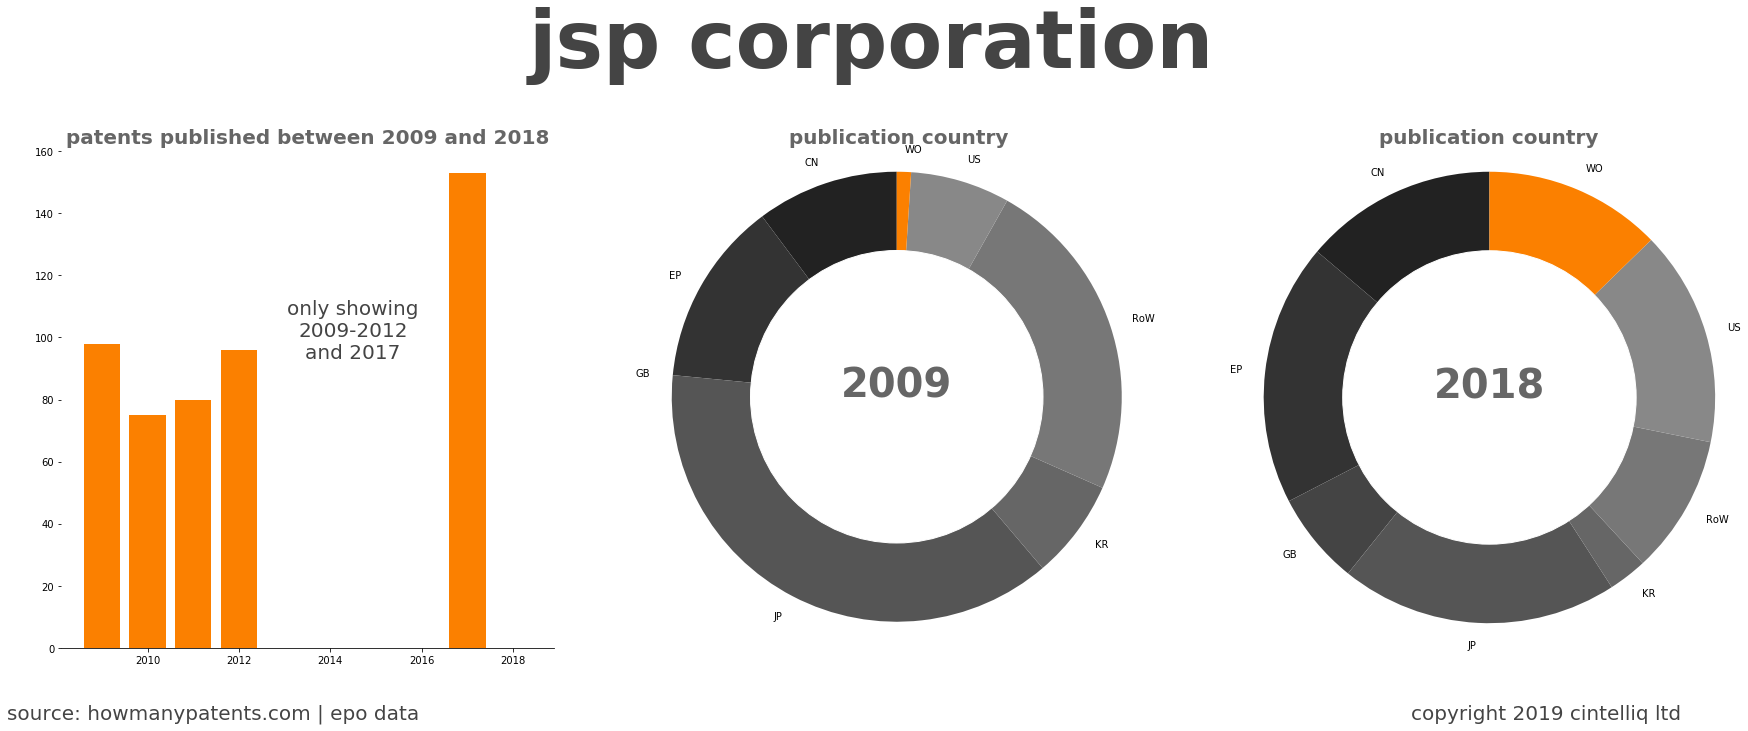 summary of patents for Jsp Corporation